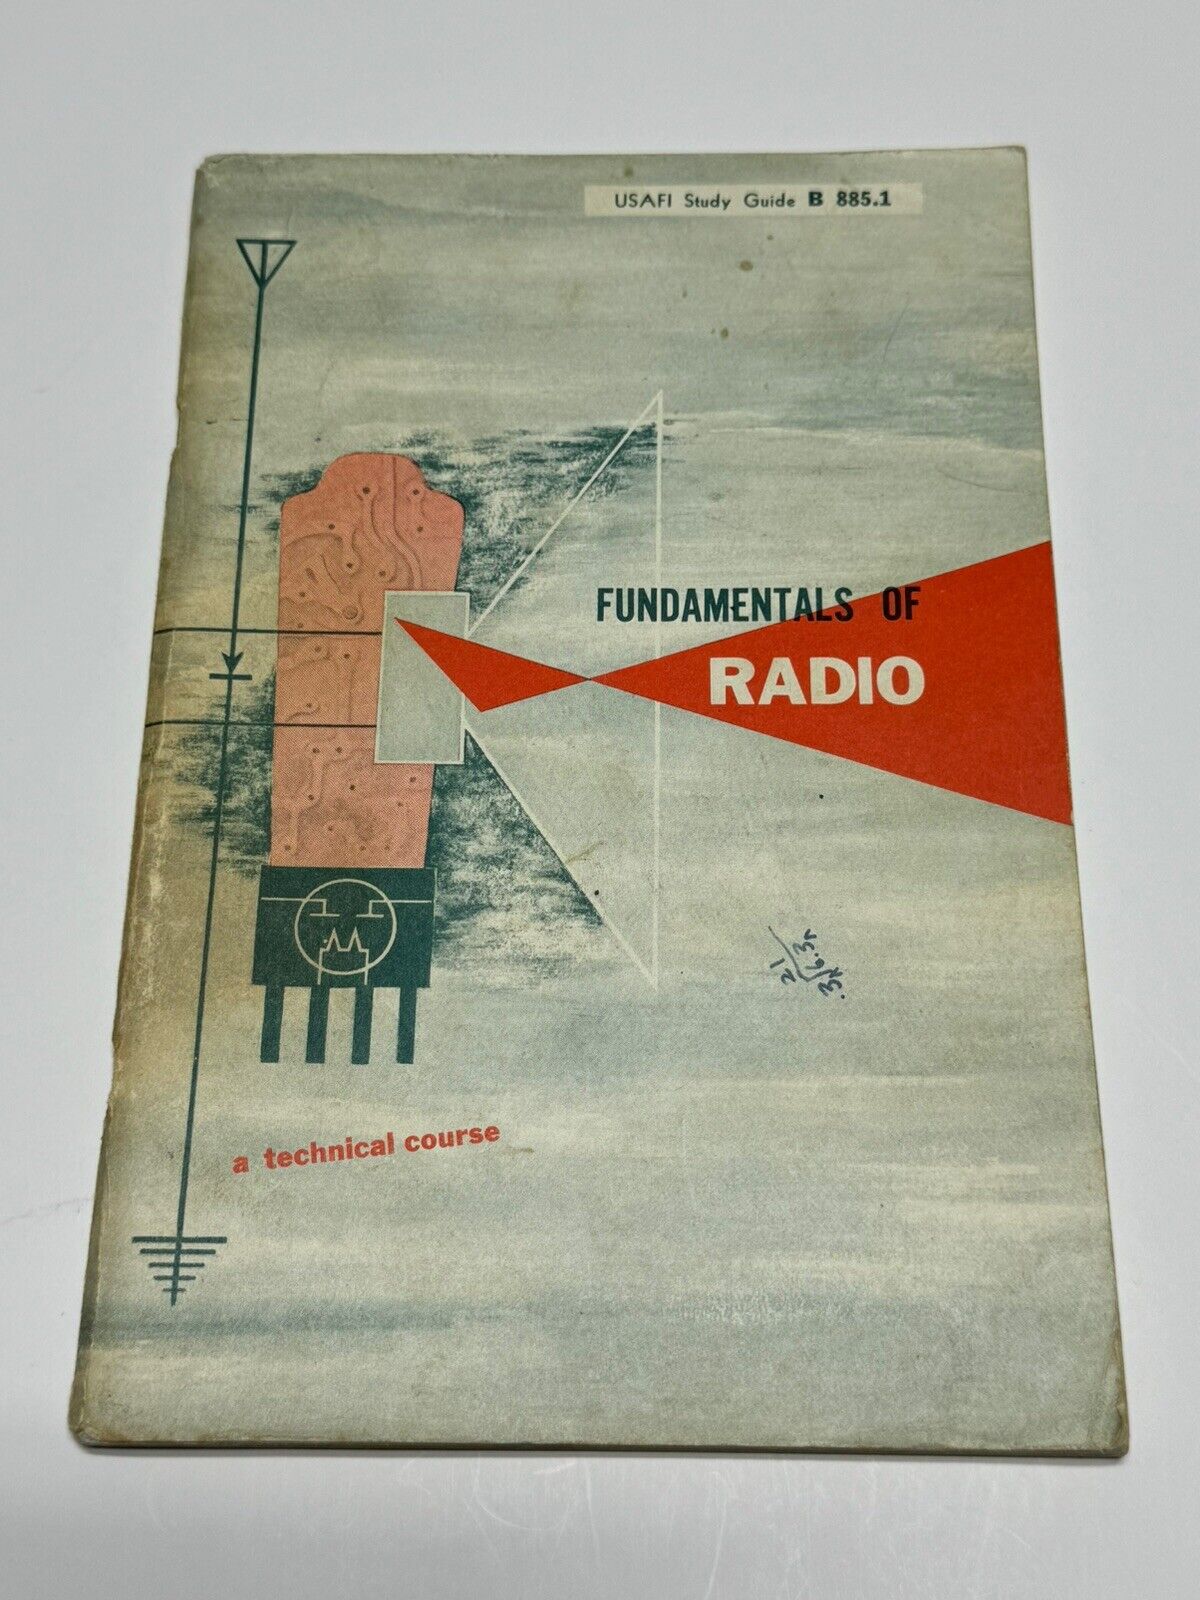 Fundamentals of Radio Study Guide B 885.1 Technical Book 1955 USAF Illustrated